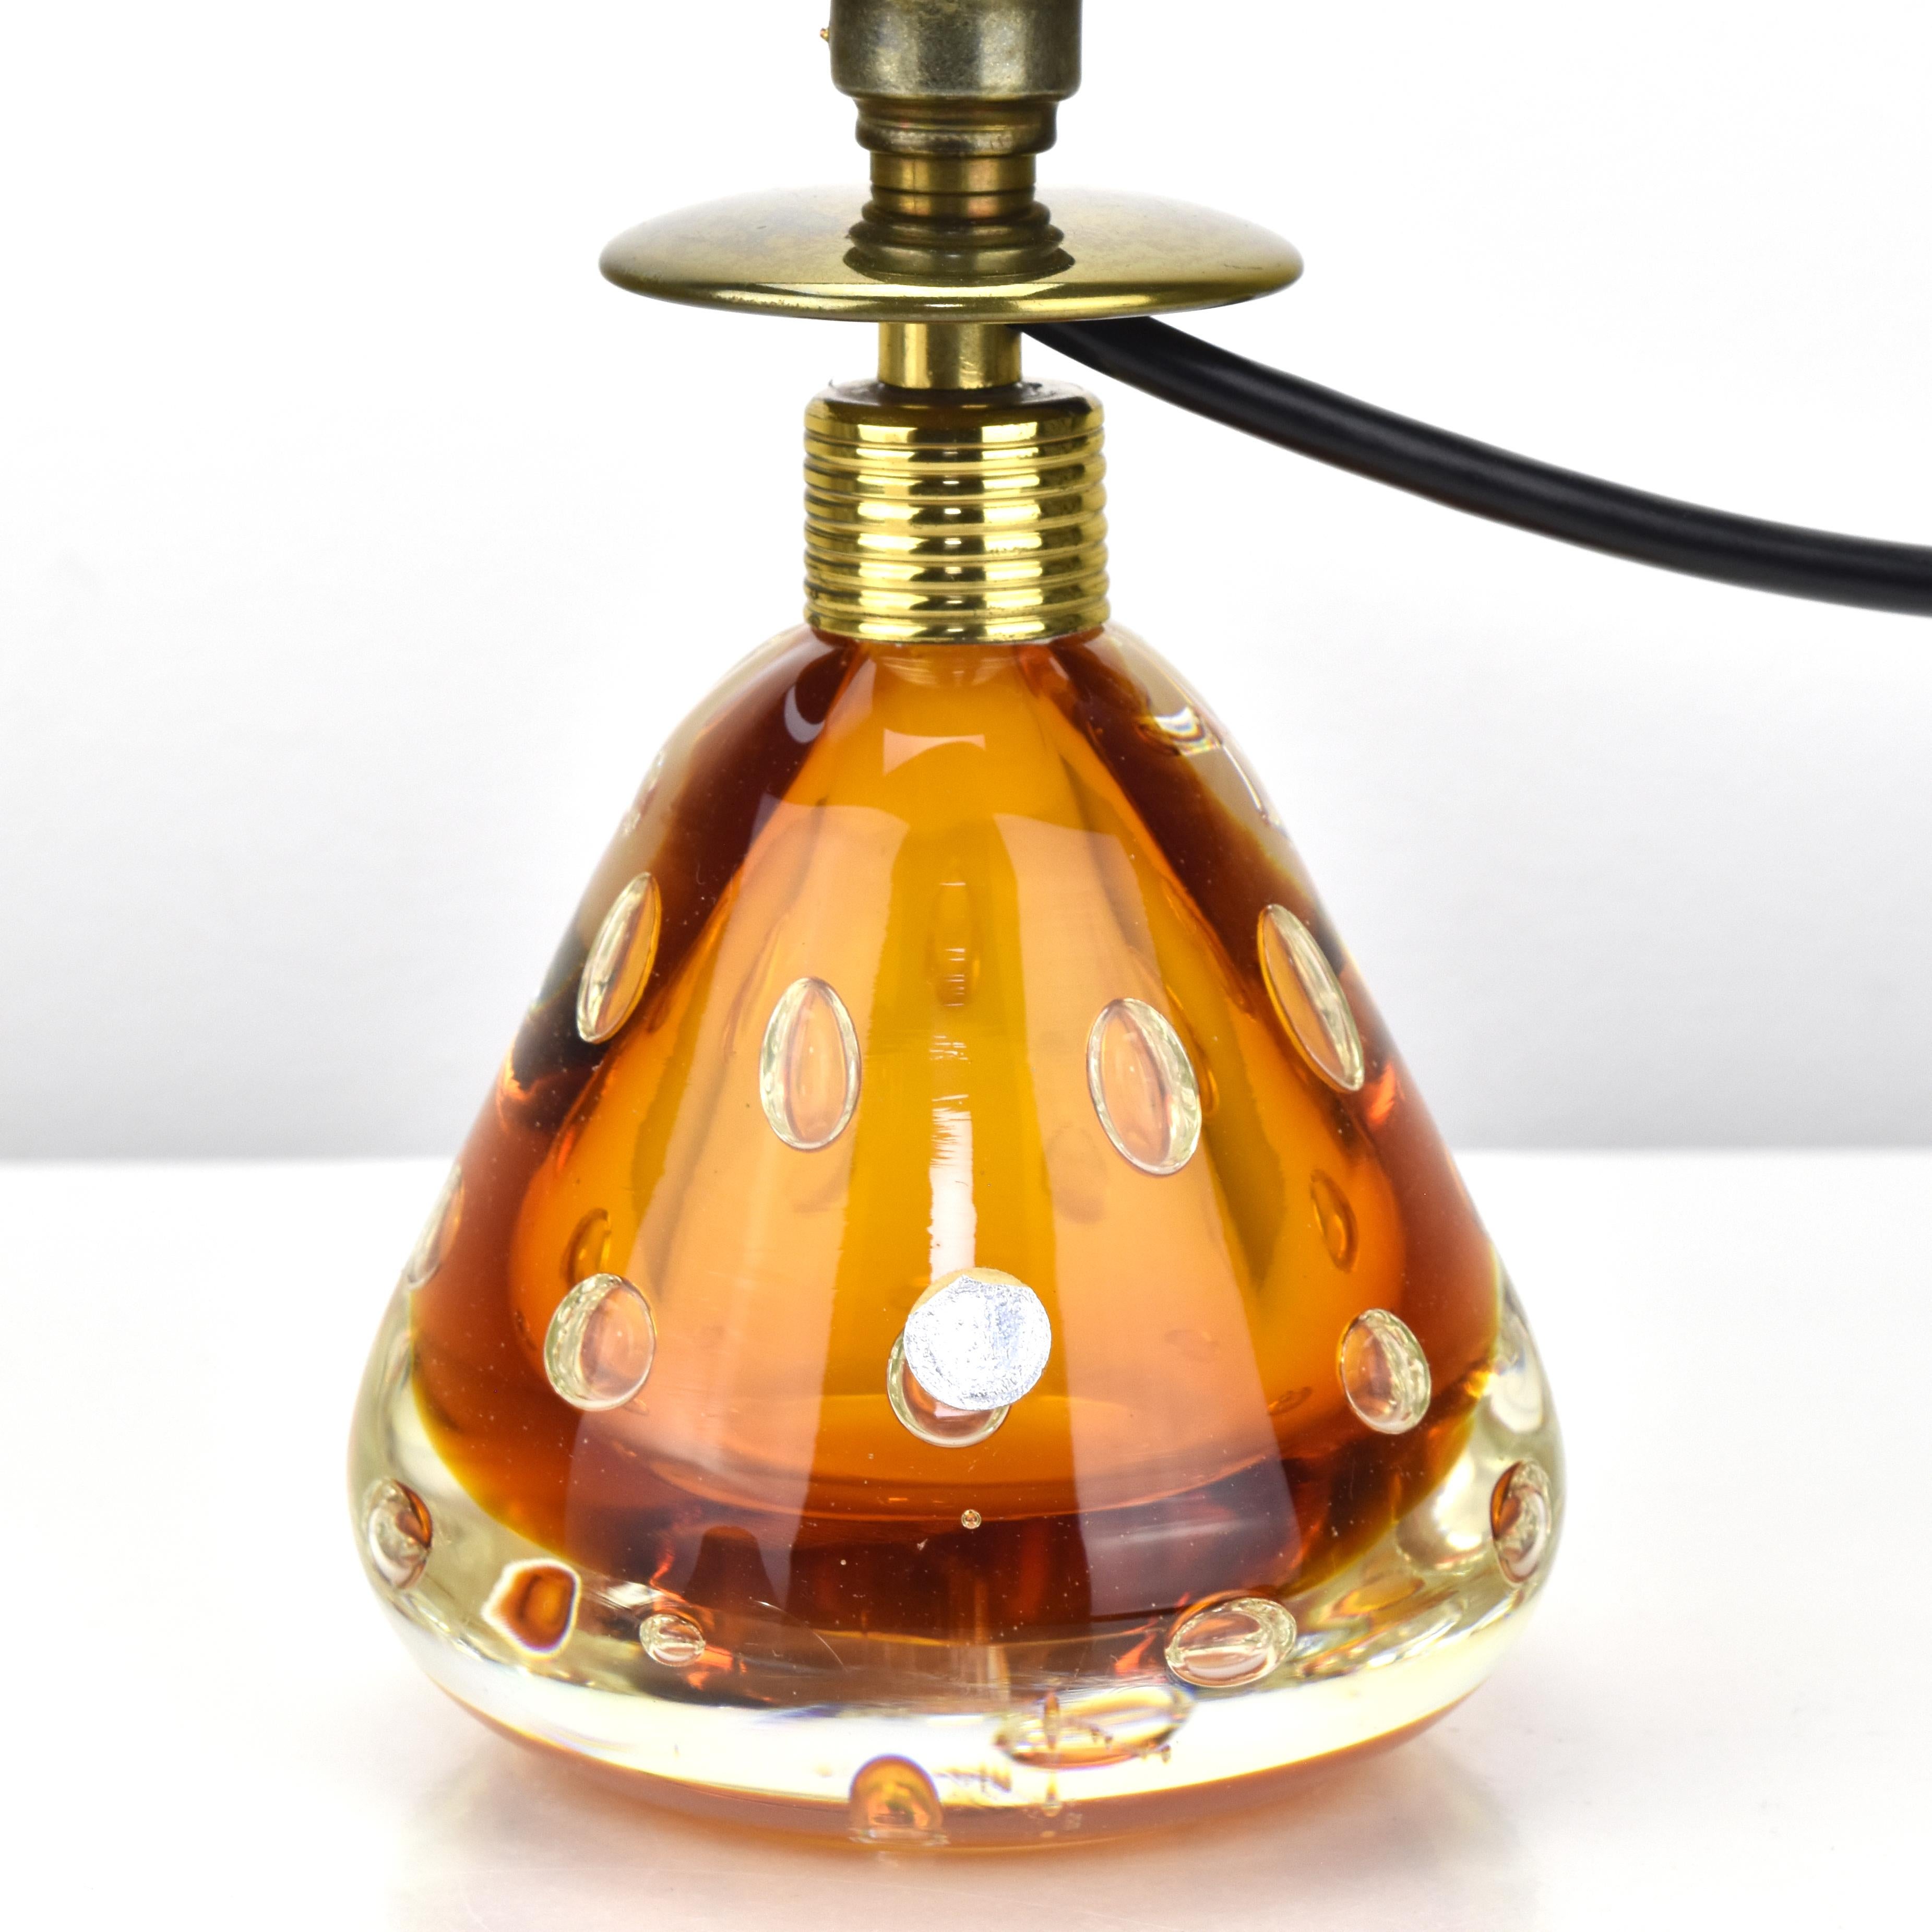 Pietro Toso for Fratelli Toso Murano Sommerso Amber Art Glass Table Lamp 1950s In Good Condition For Sale In Bad Säckingen, DE